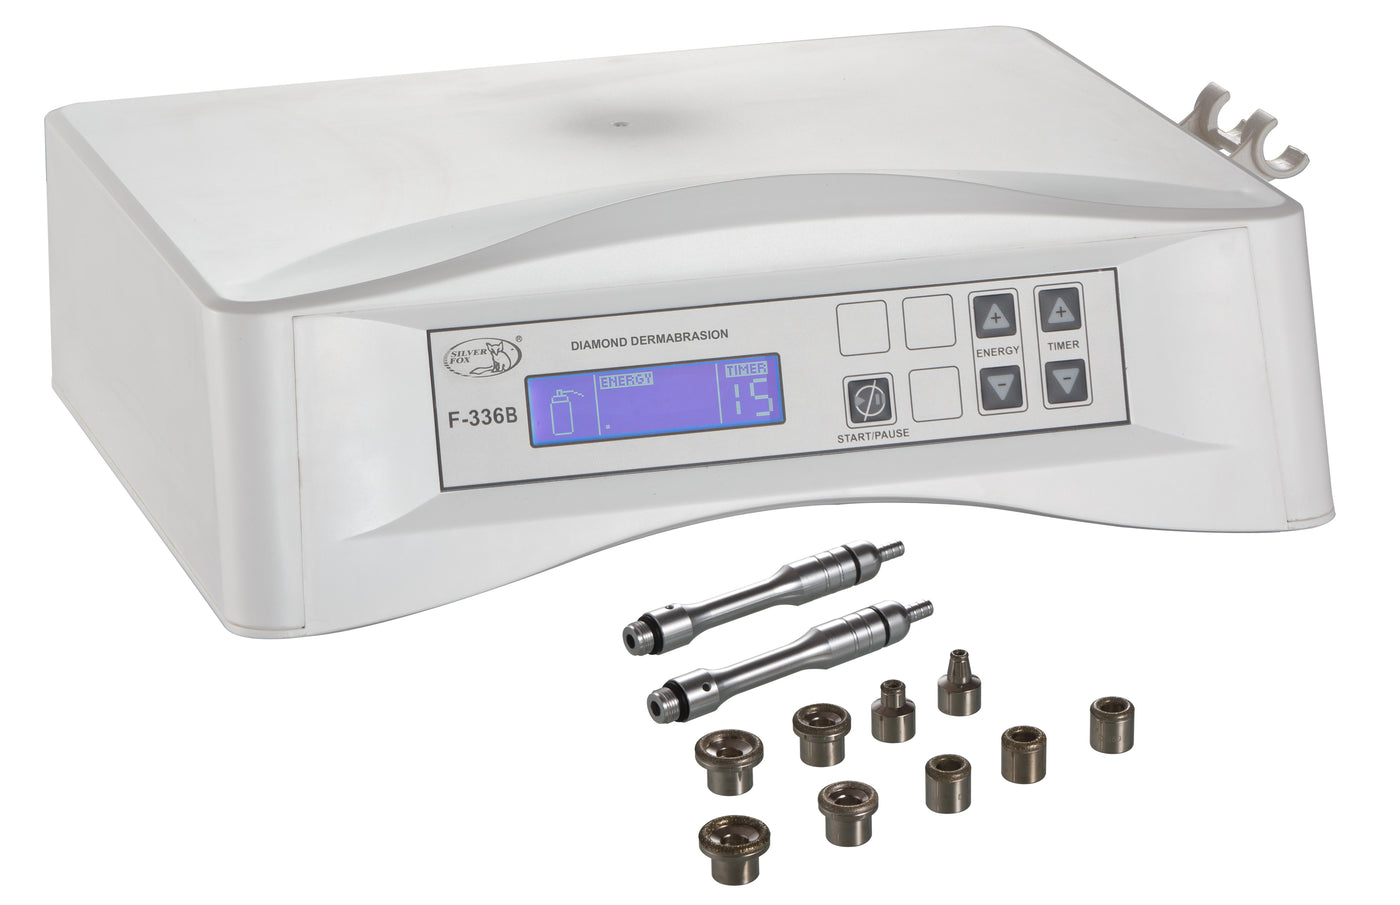 Microdermabrasion Instrument with Diamond Heads and Vacuum System